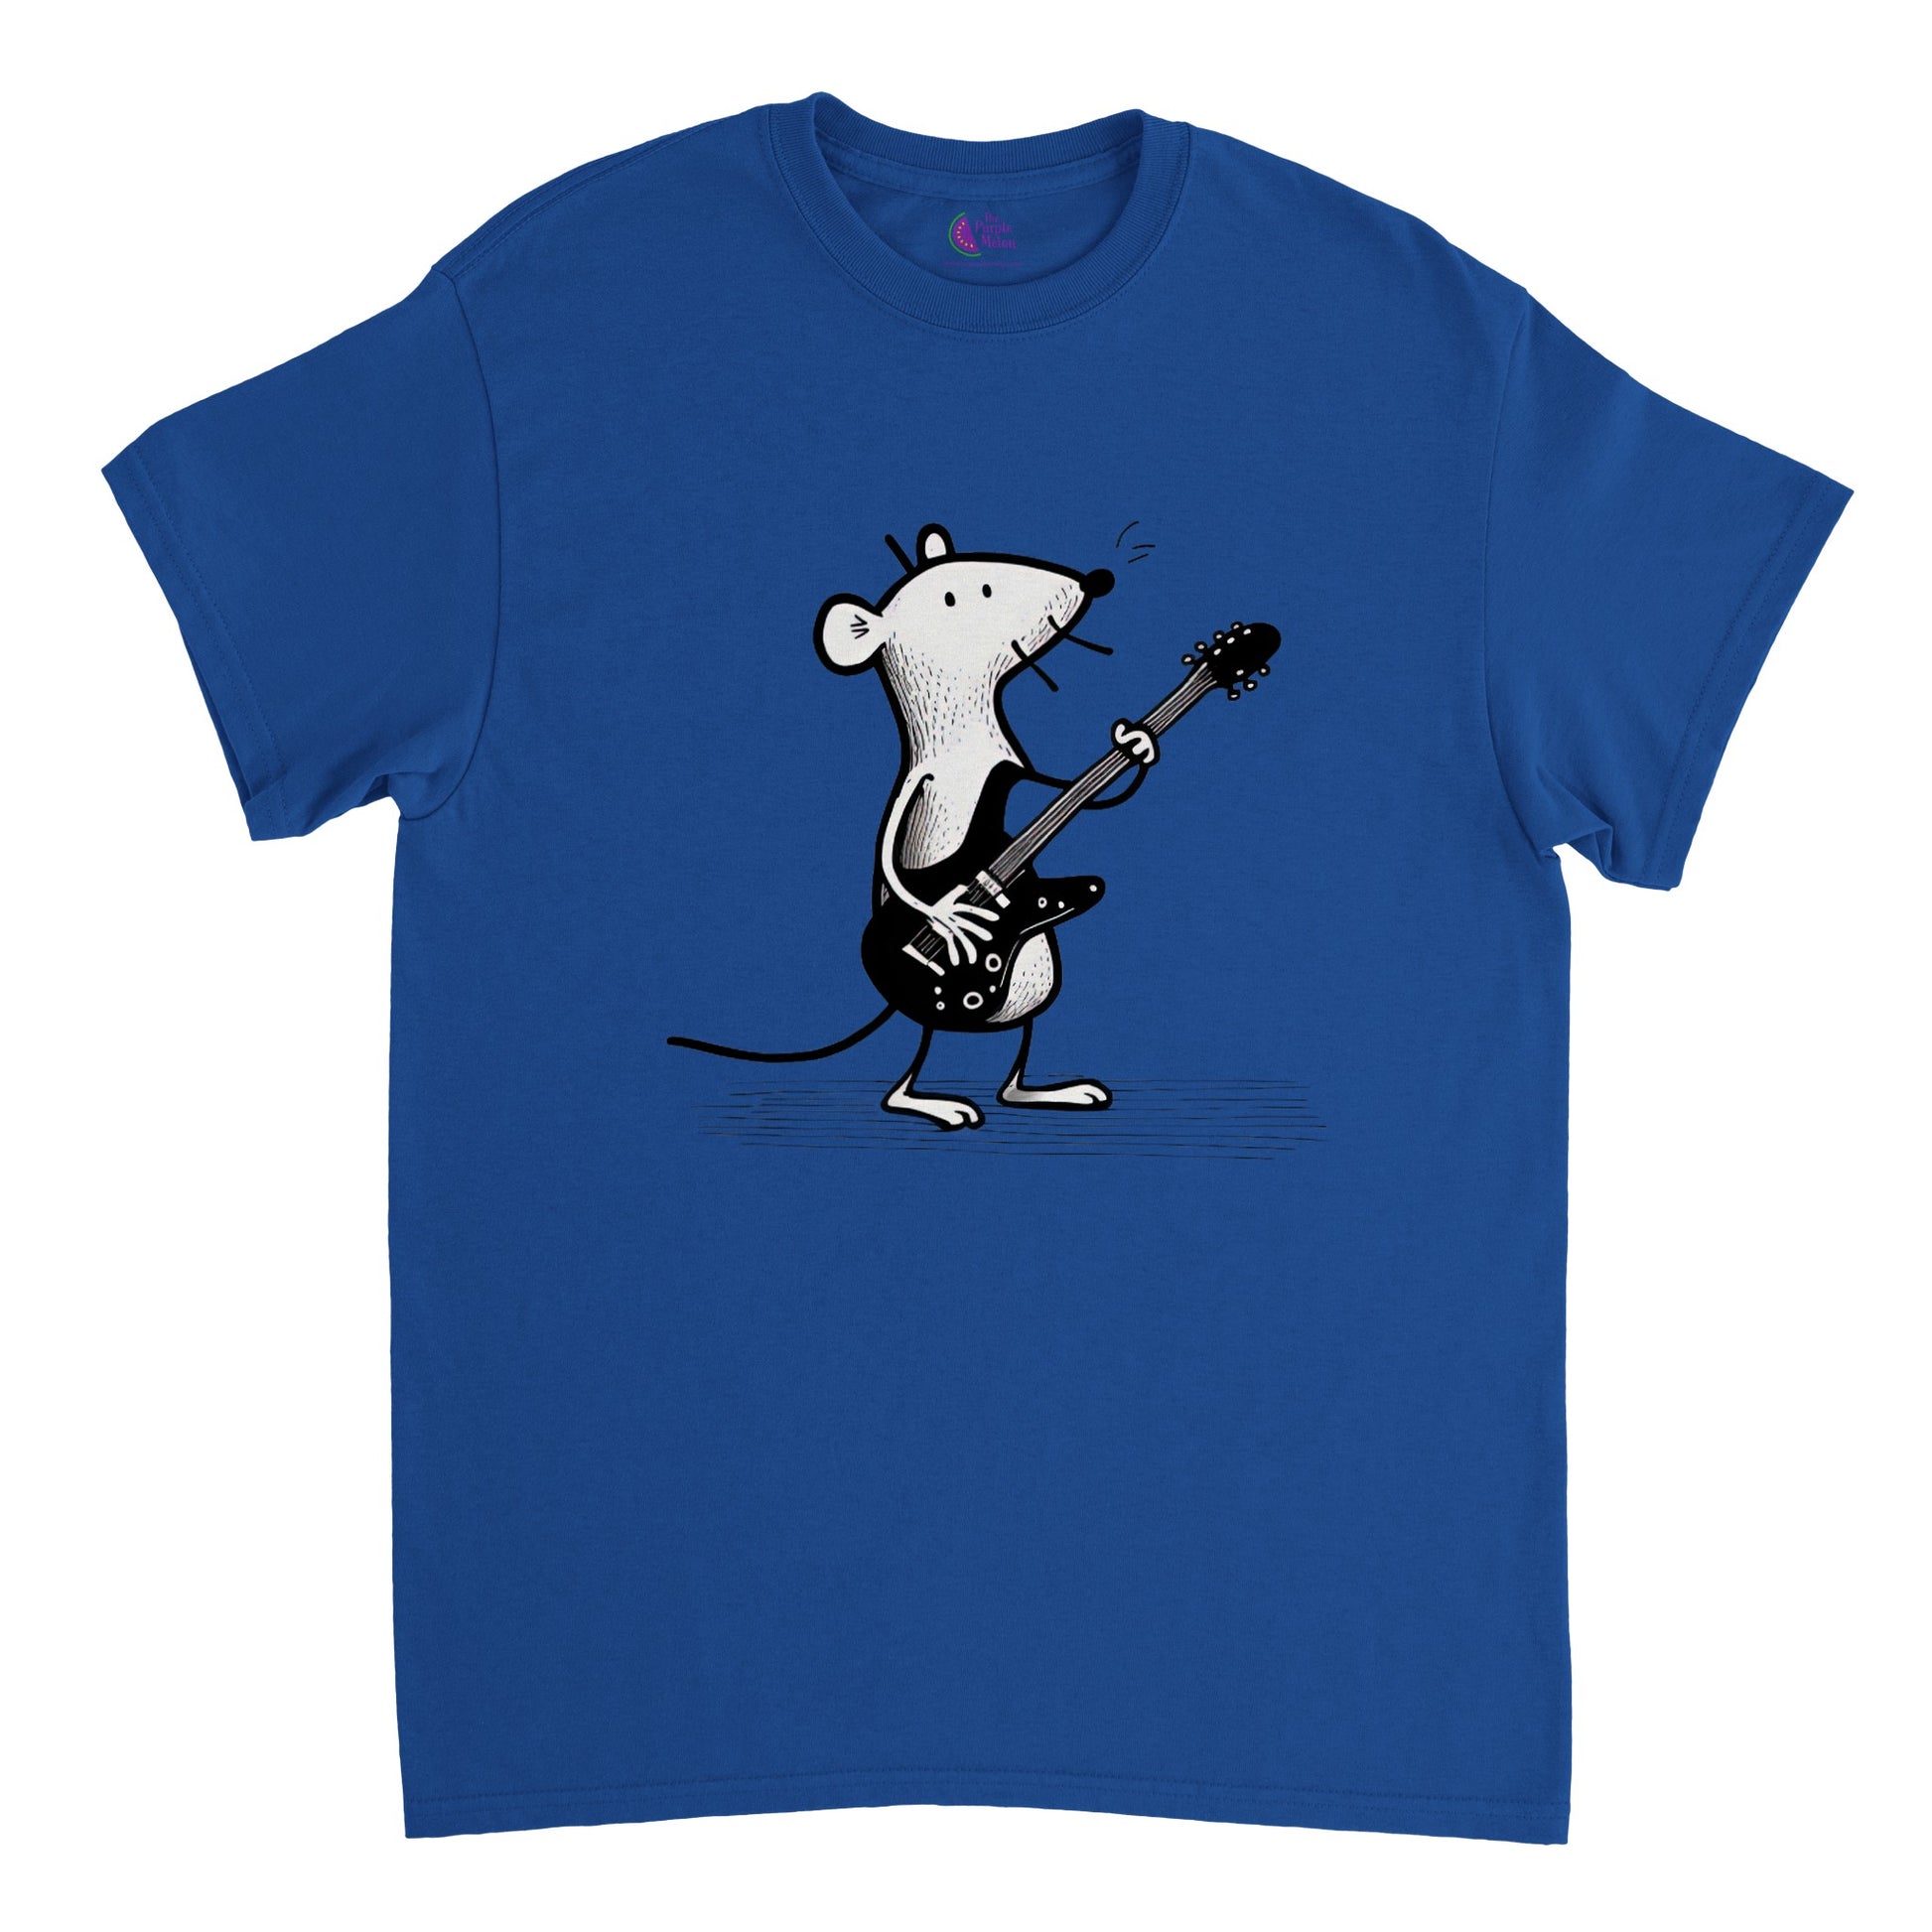 Blue t-shirt with a mouse playing guitar print